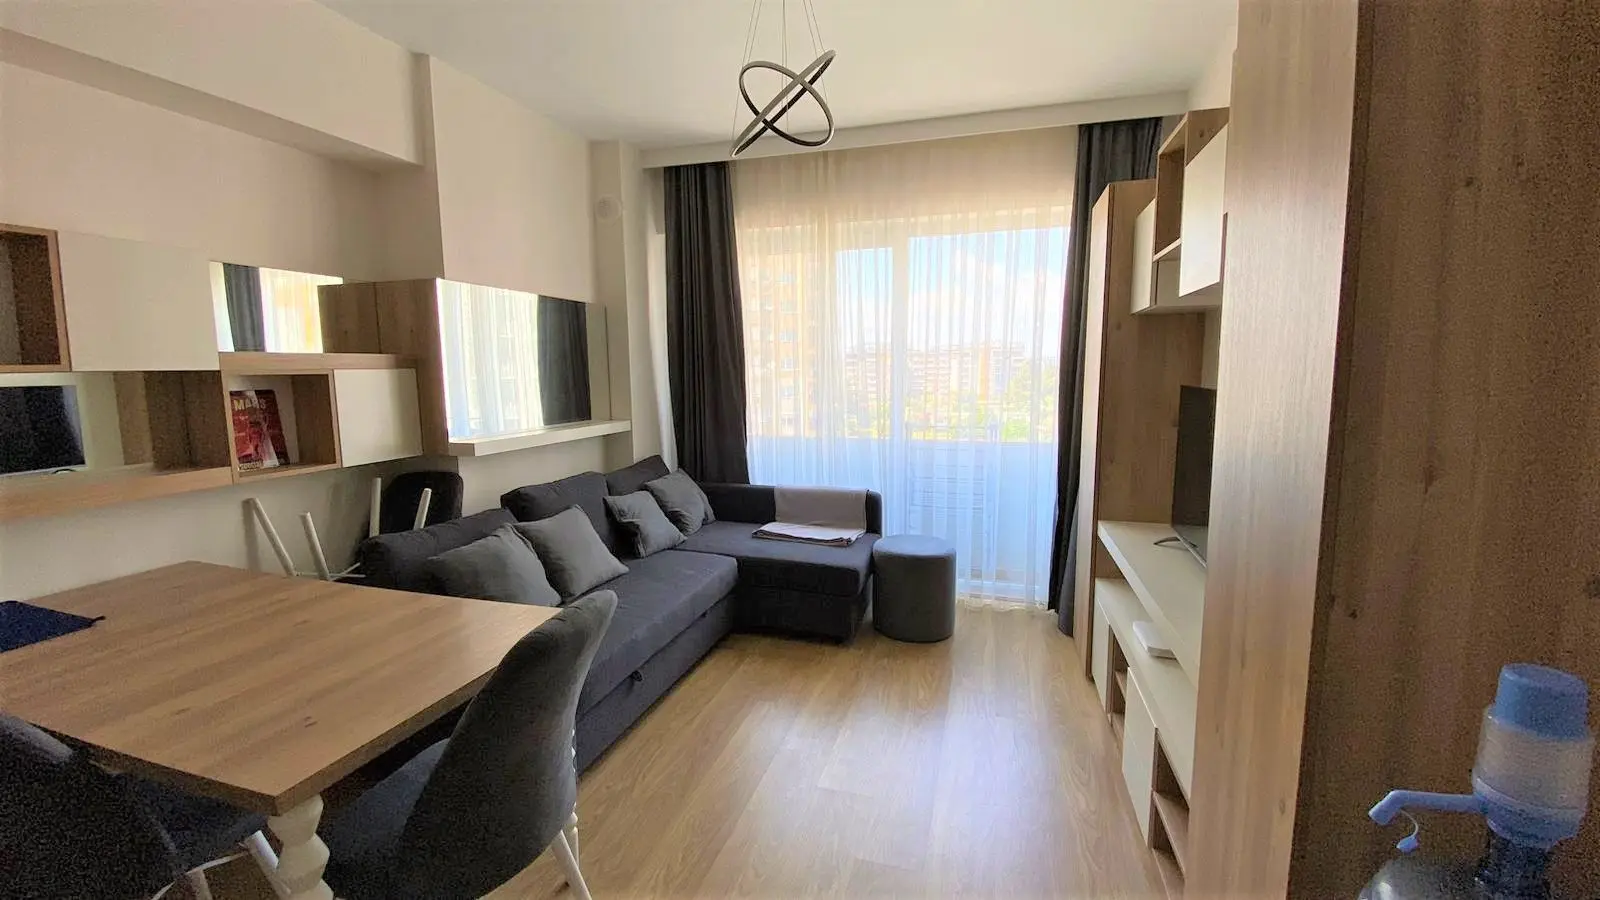 NEW FURNISHED APARTMENT 1+1 IN ANTALYA - FULL ACTIVITY